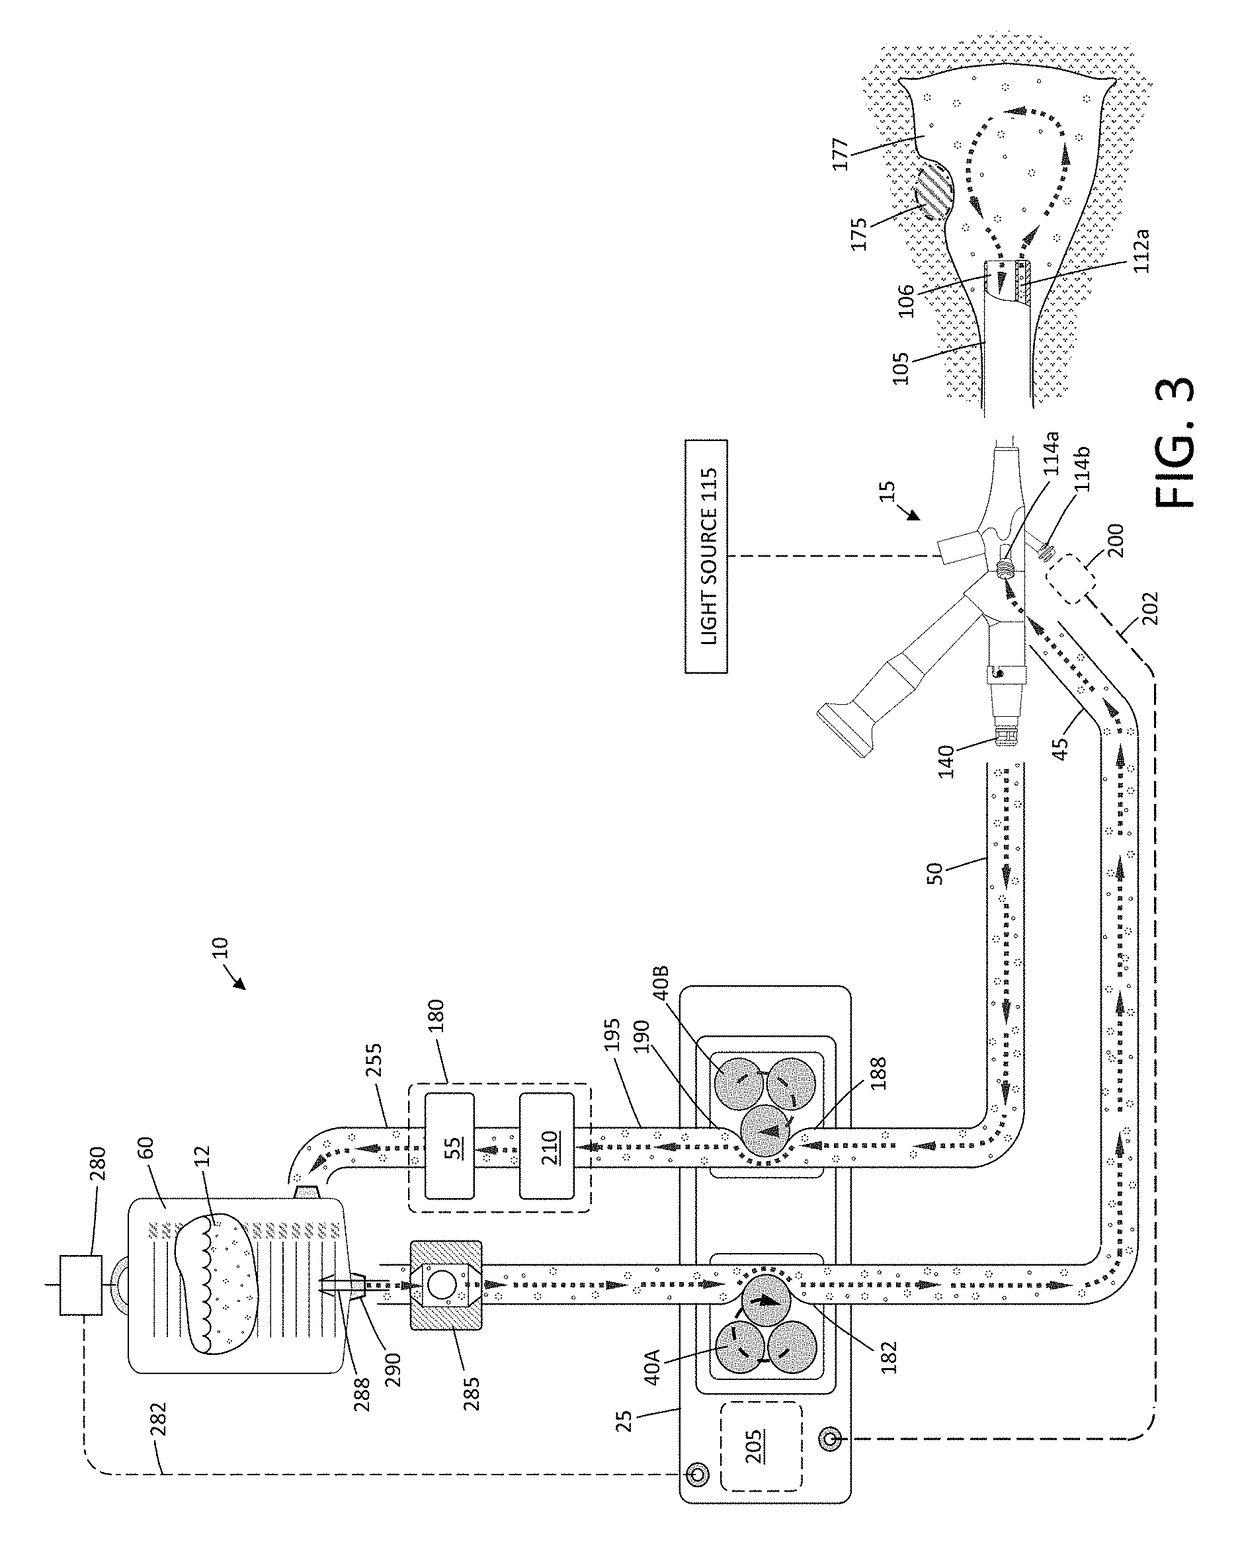 Fluid management system and methods